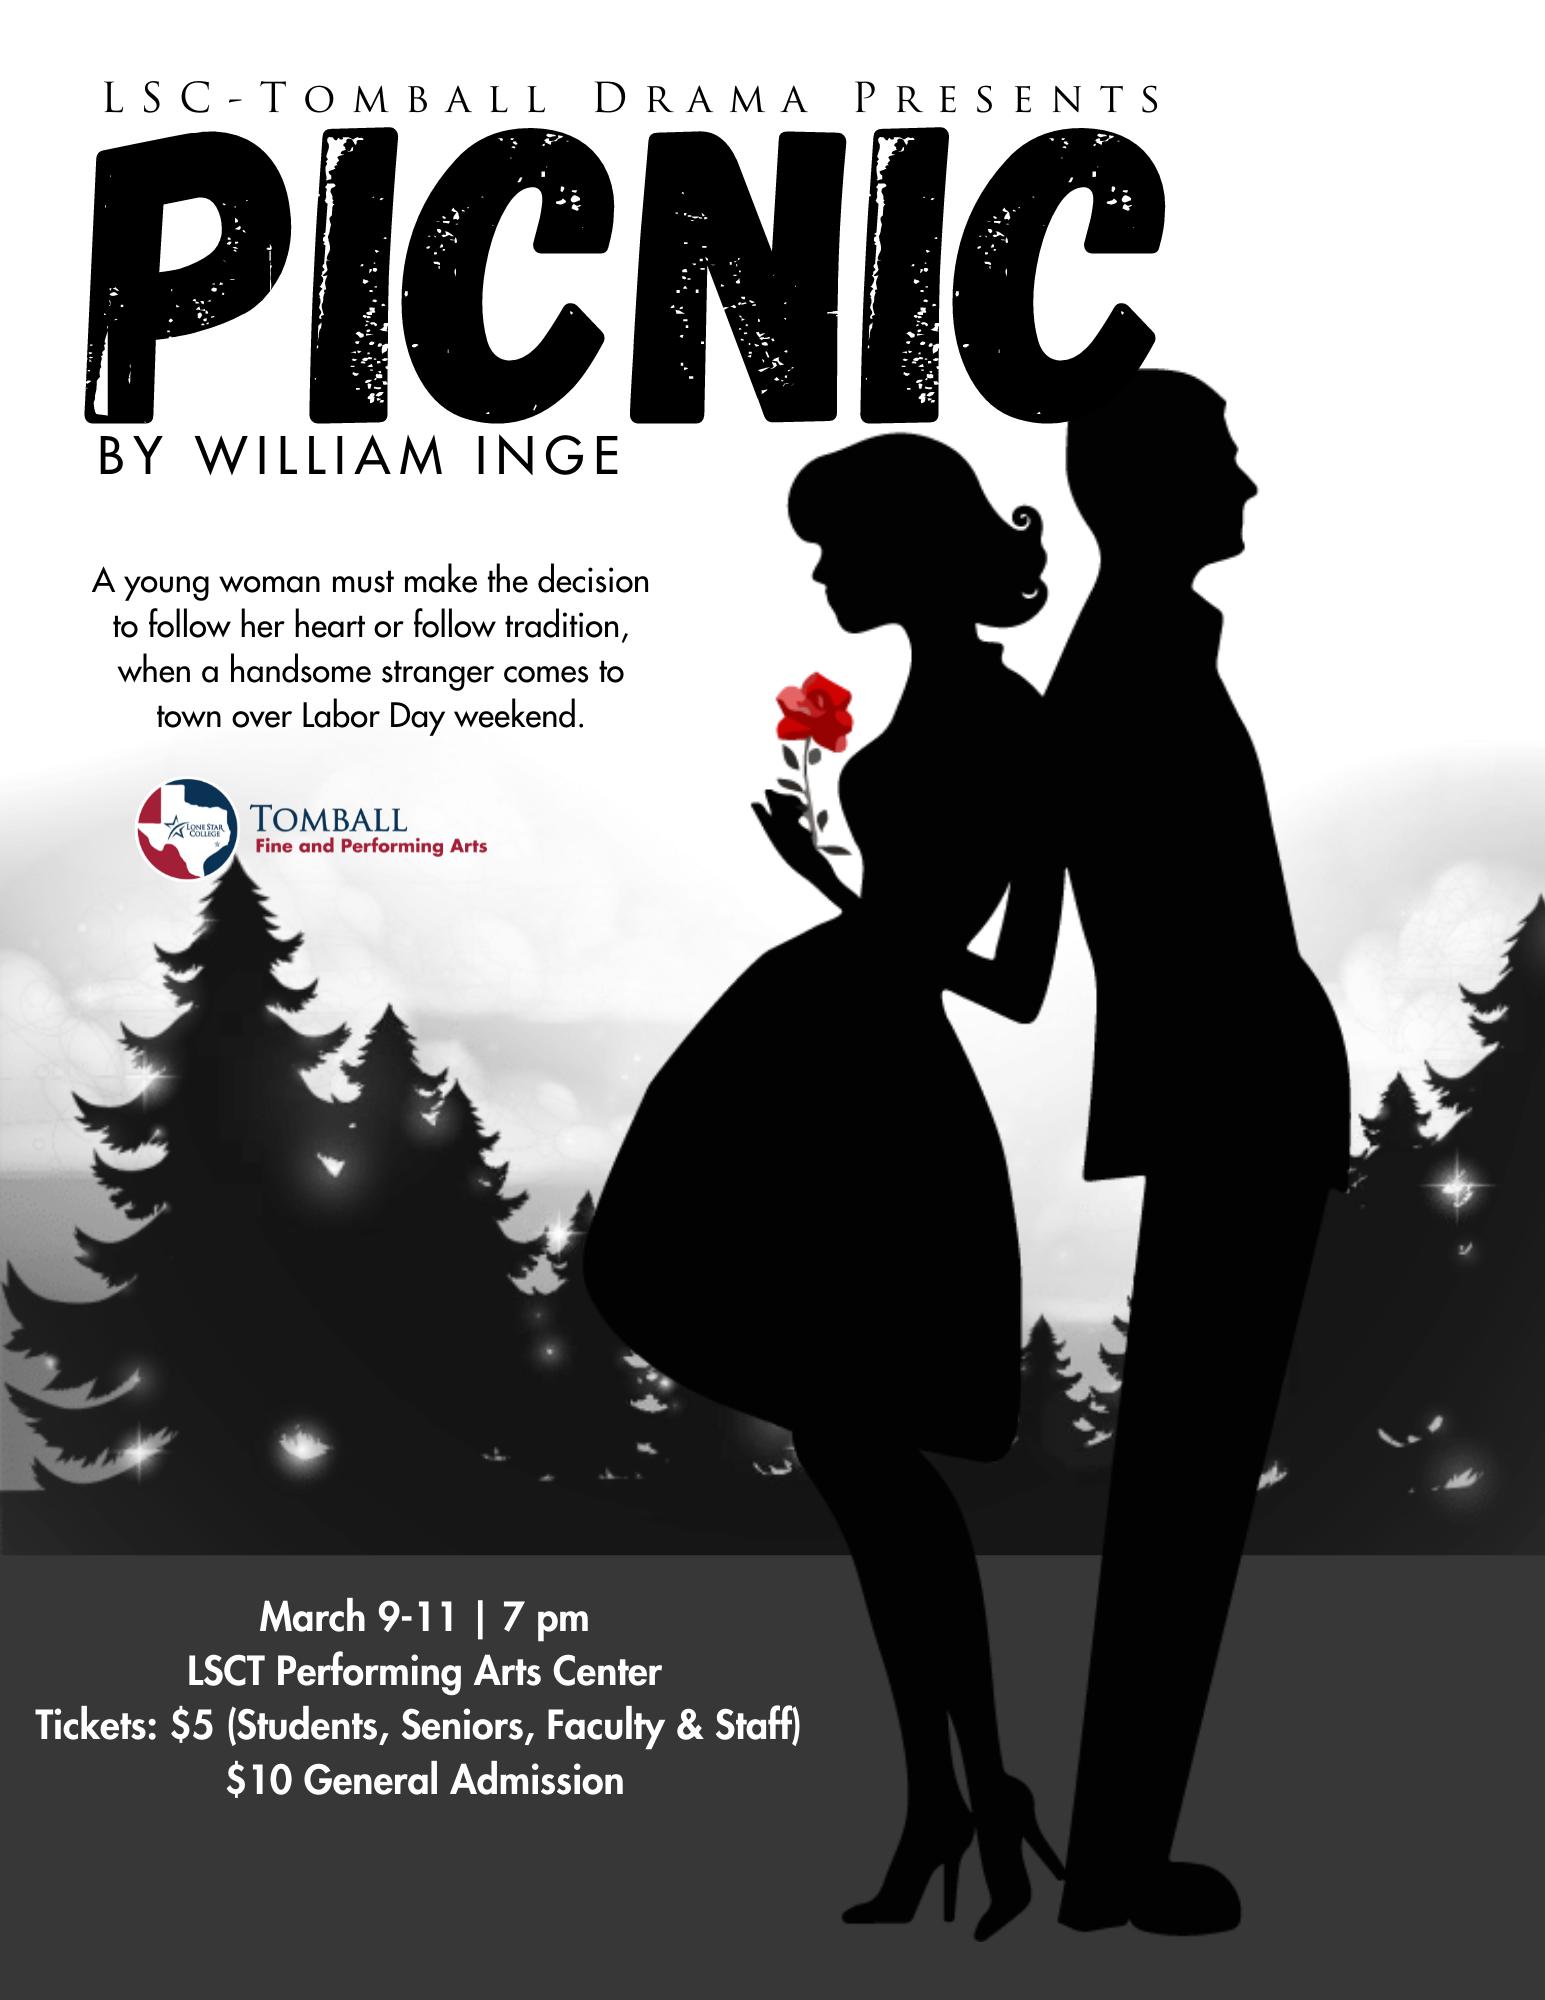 LSC-Tomball Drama presents "Picnic" by William Inge. A young woman must make the decision to follow her heart or follow tradition when a handsome stranger comes to town over Labor Day weekend. March 9-11, 7pm, Performing Arts Center, Tickets $5 student, seniors, faculty, & staff; $10 general admission. Image Description: a black and white image of a man and woman back to back in front of a forest of trees. The woman holds a red rose.